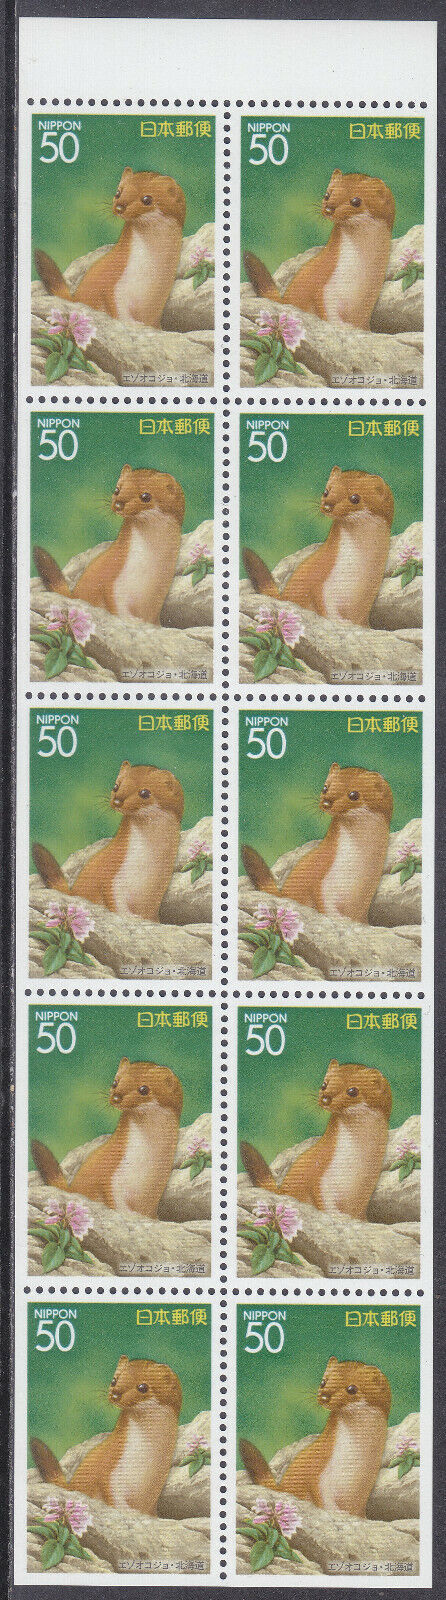 Japan - Stamp Issue 1997 - Booklet Pane (2335a)